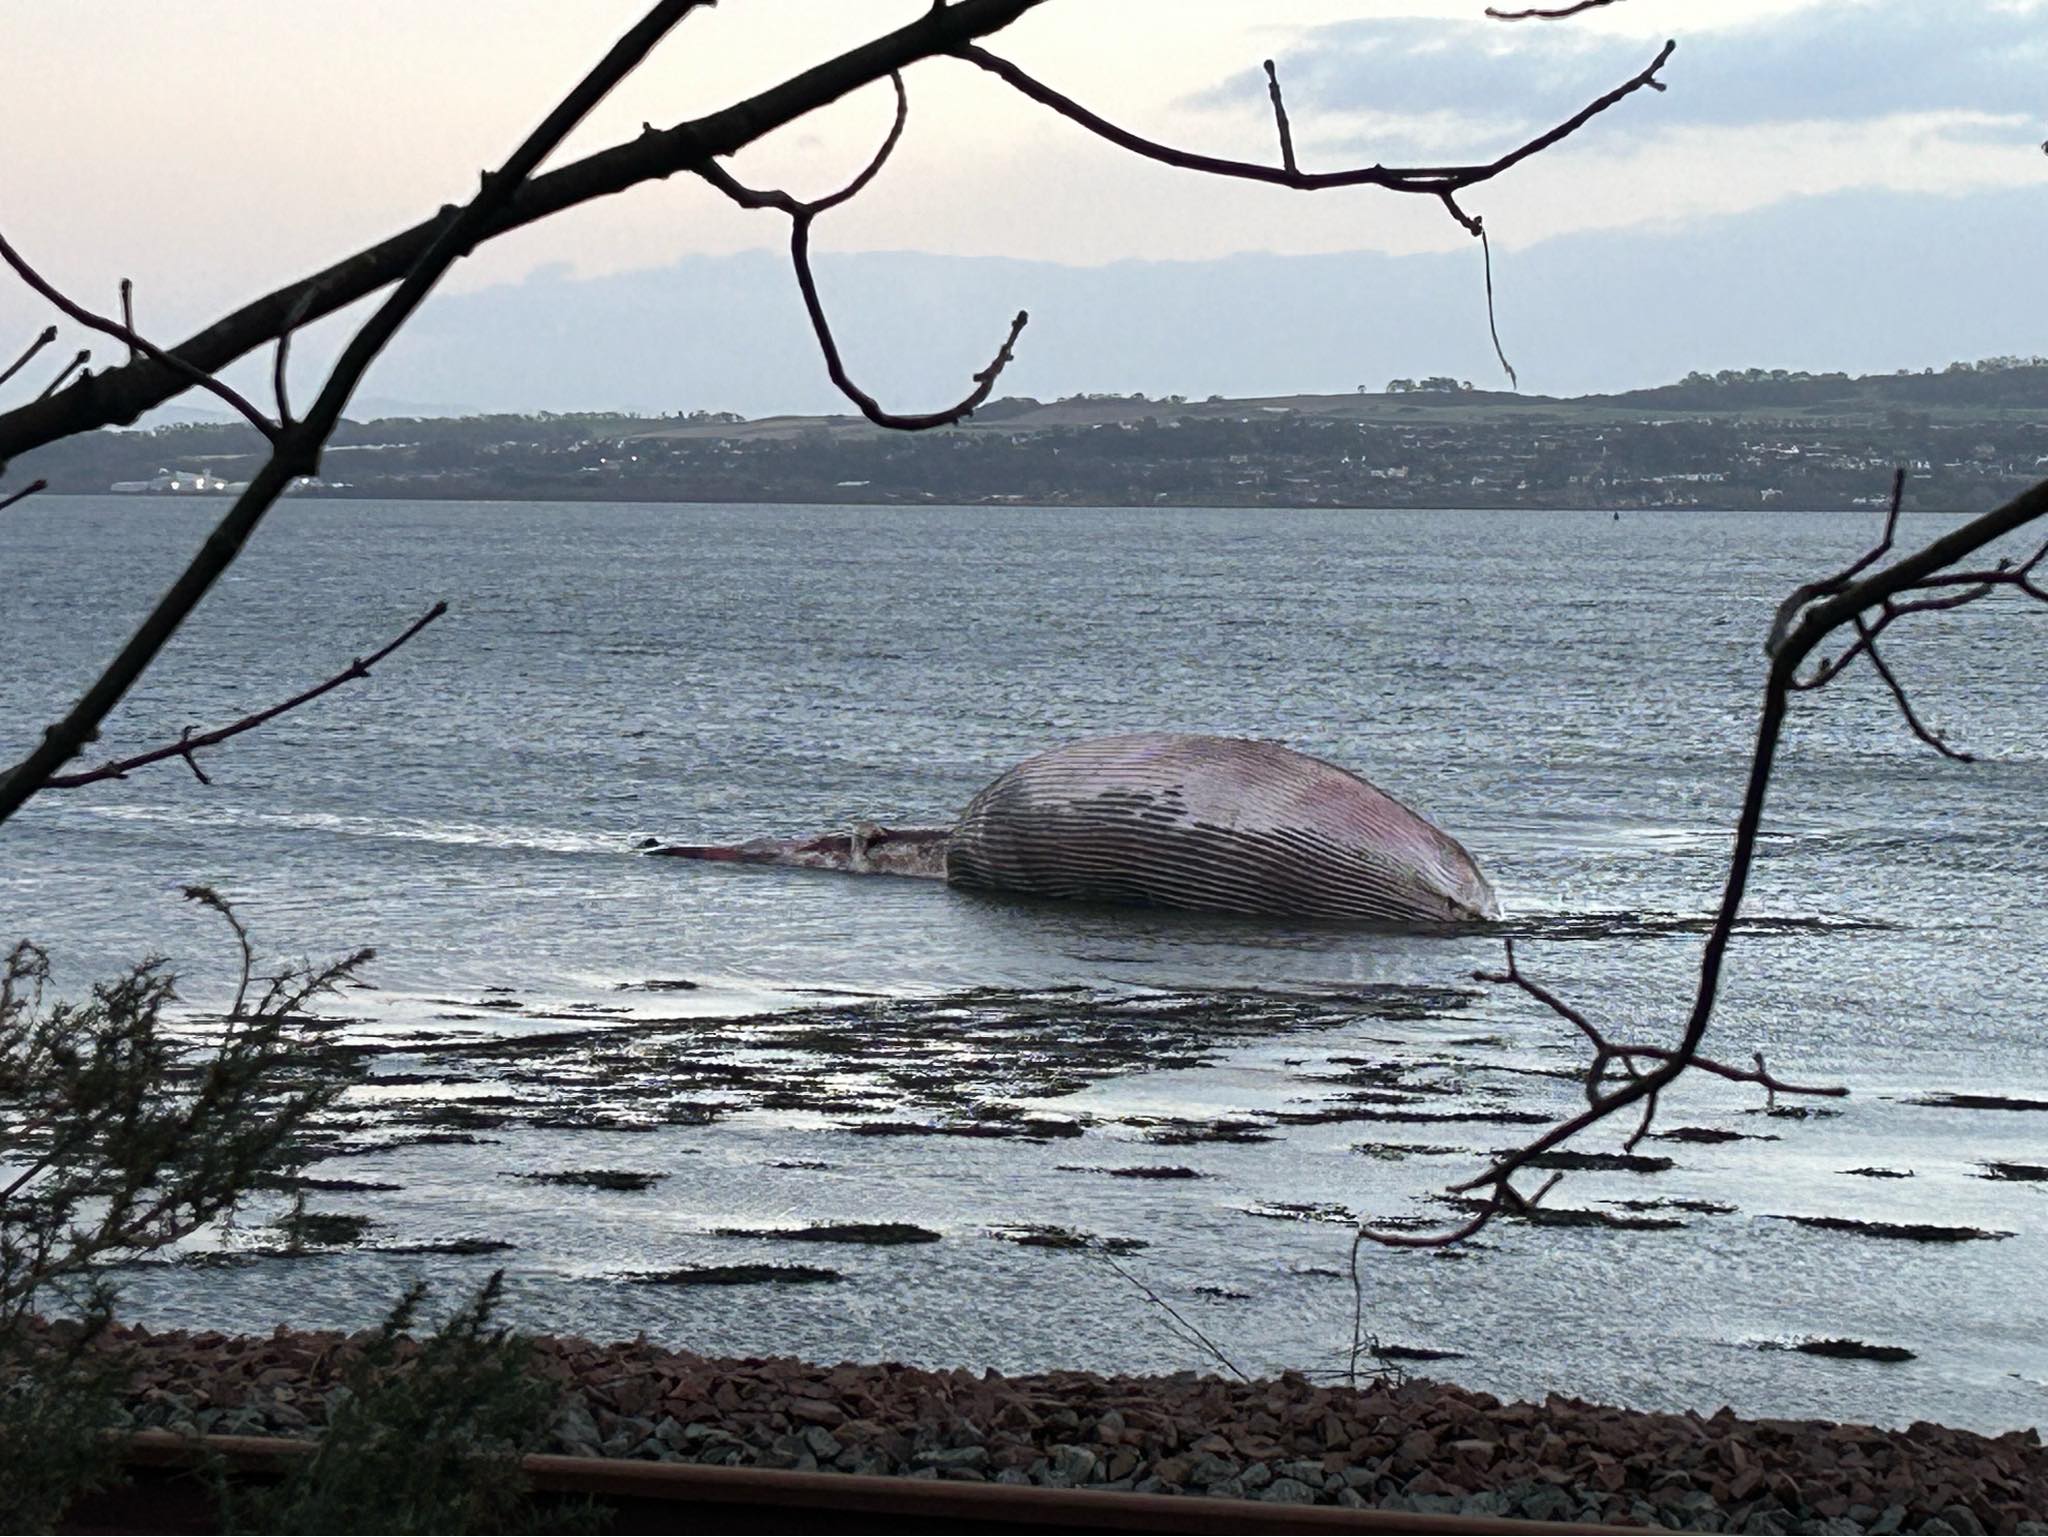 The whale was washed up close to the shoreline. Photo: Culross Stables Community Hub/Facebook